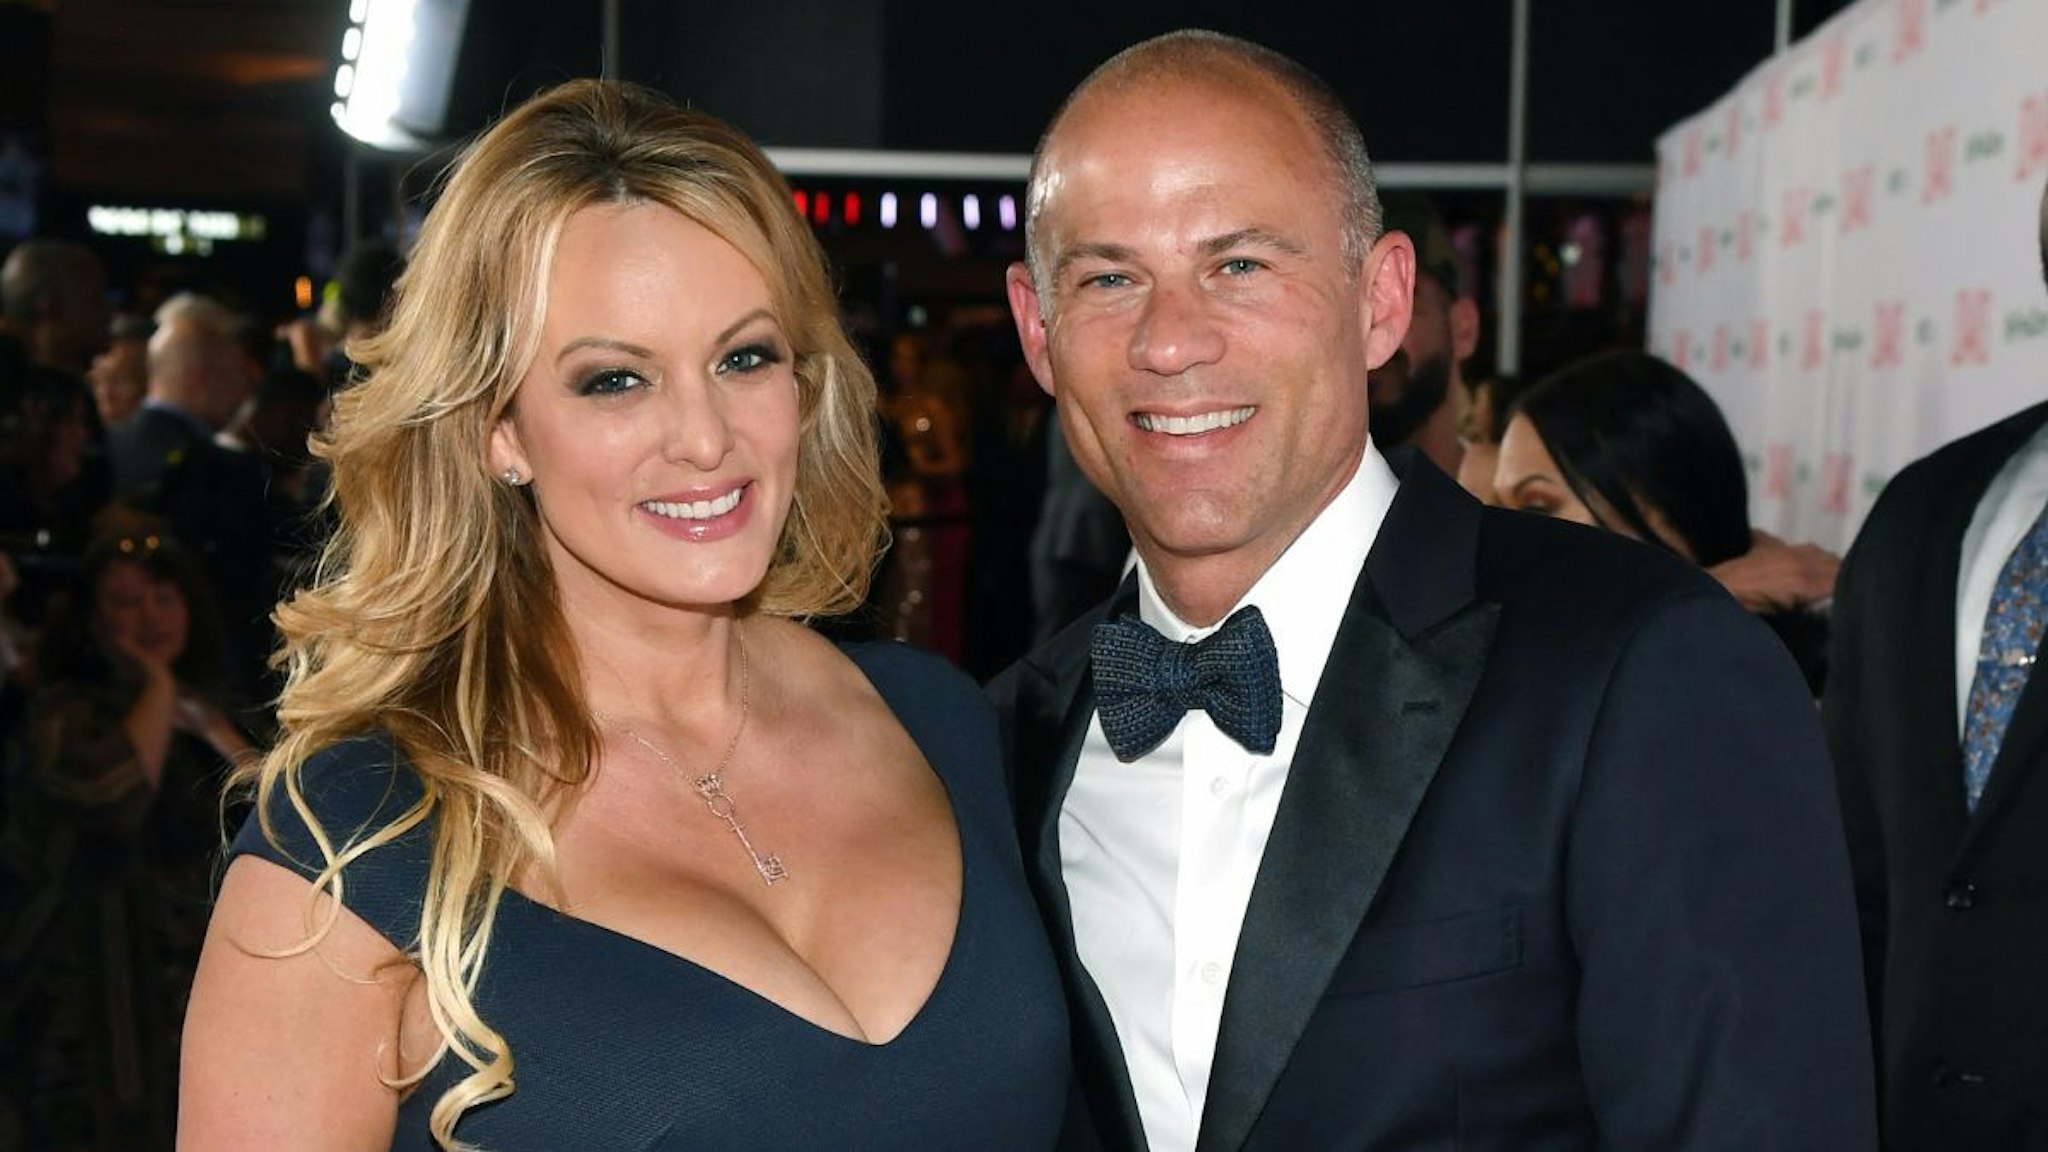 Adult film actress/director Stormy Daniels (L) and attorney Michael Avenatti attend the 2019 Adult Video News Awards at The Joint inside the Hard Rock Hotel & Casino on January 26, 2019 in Las Vegas, Nevada.